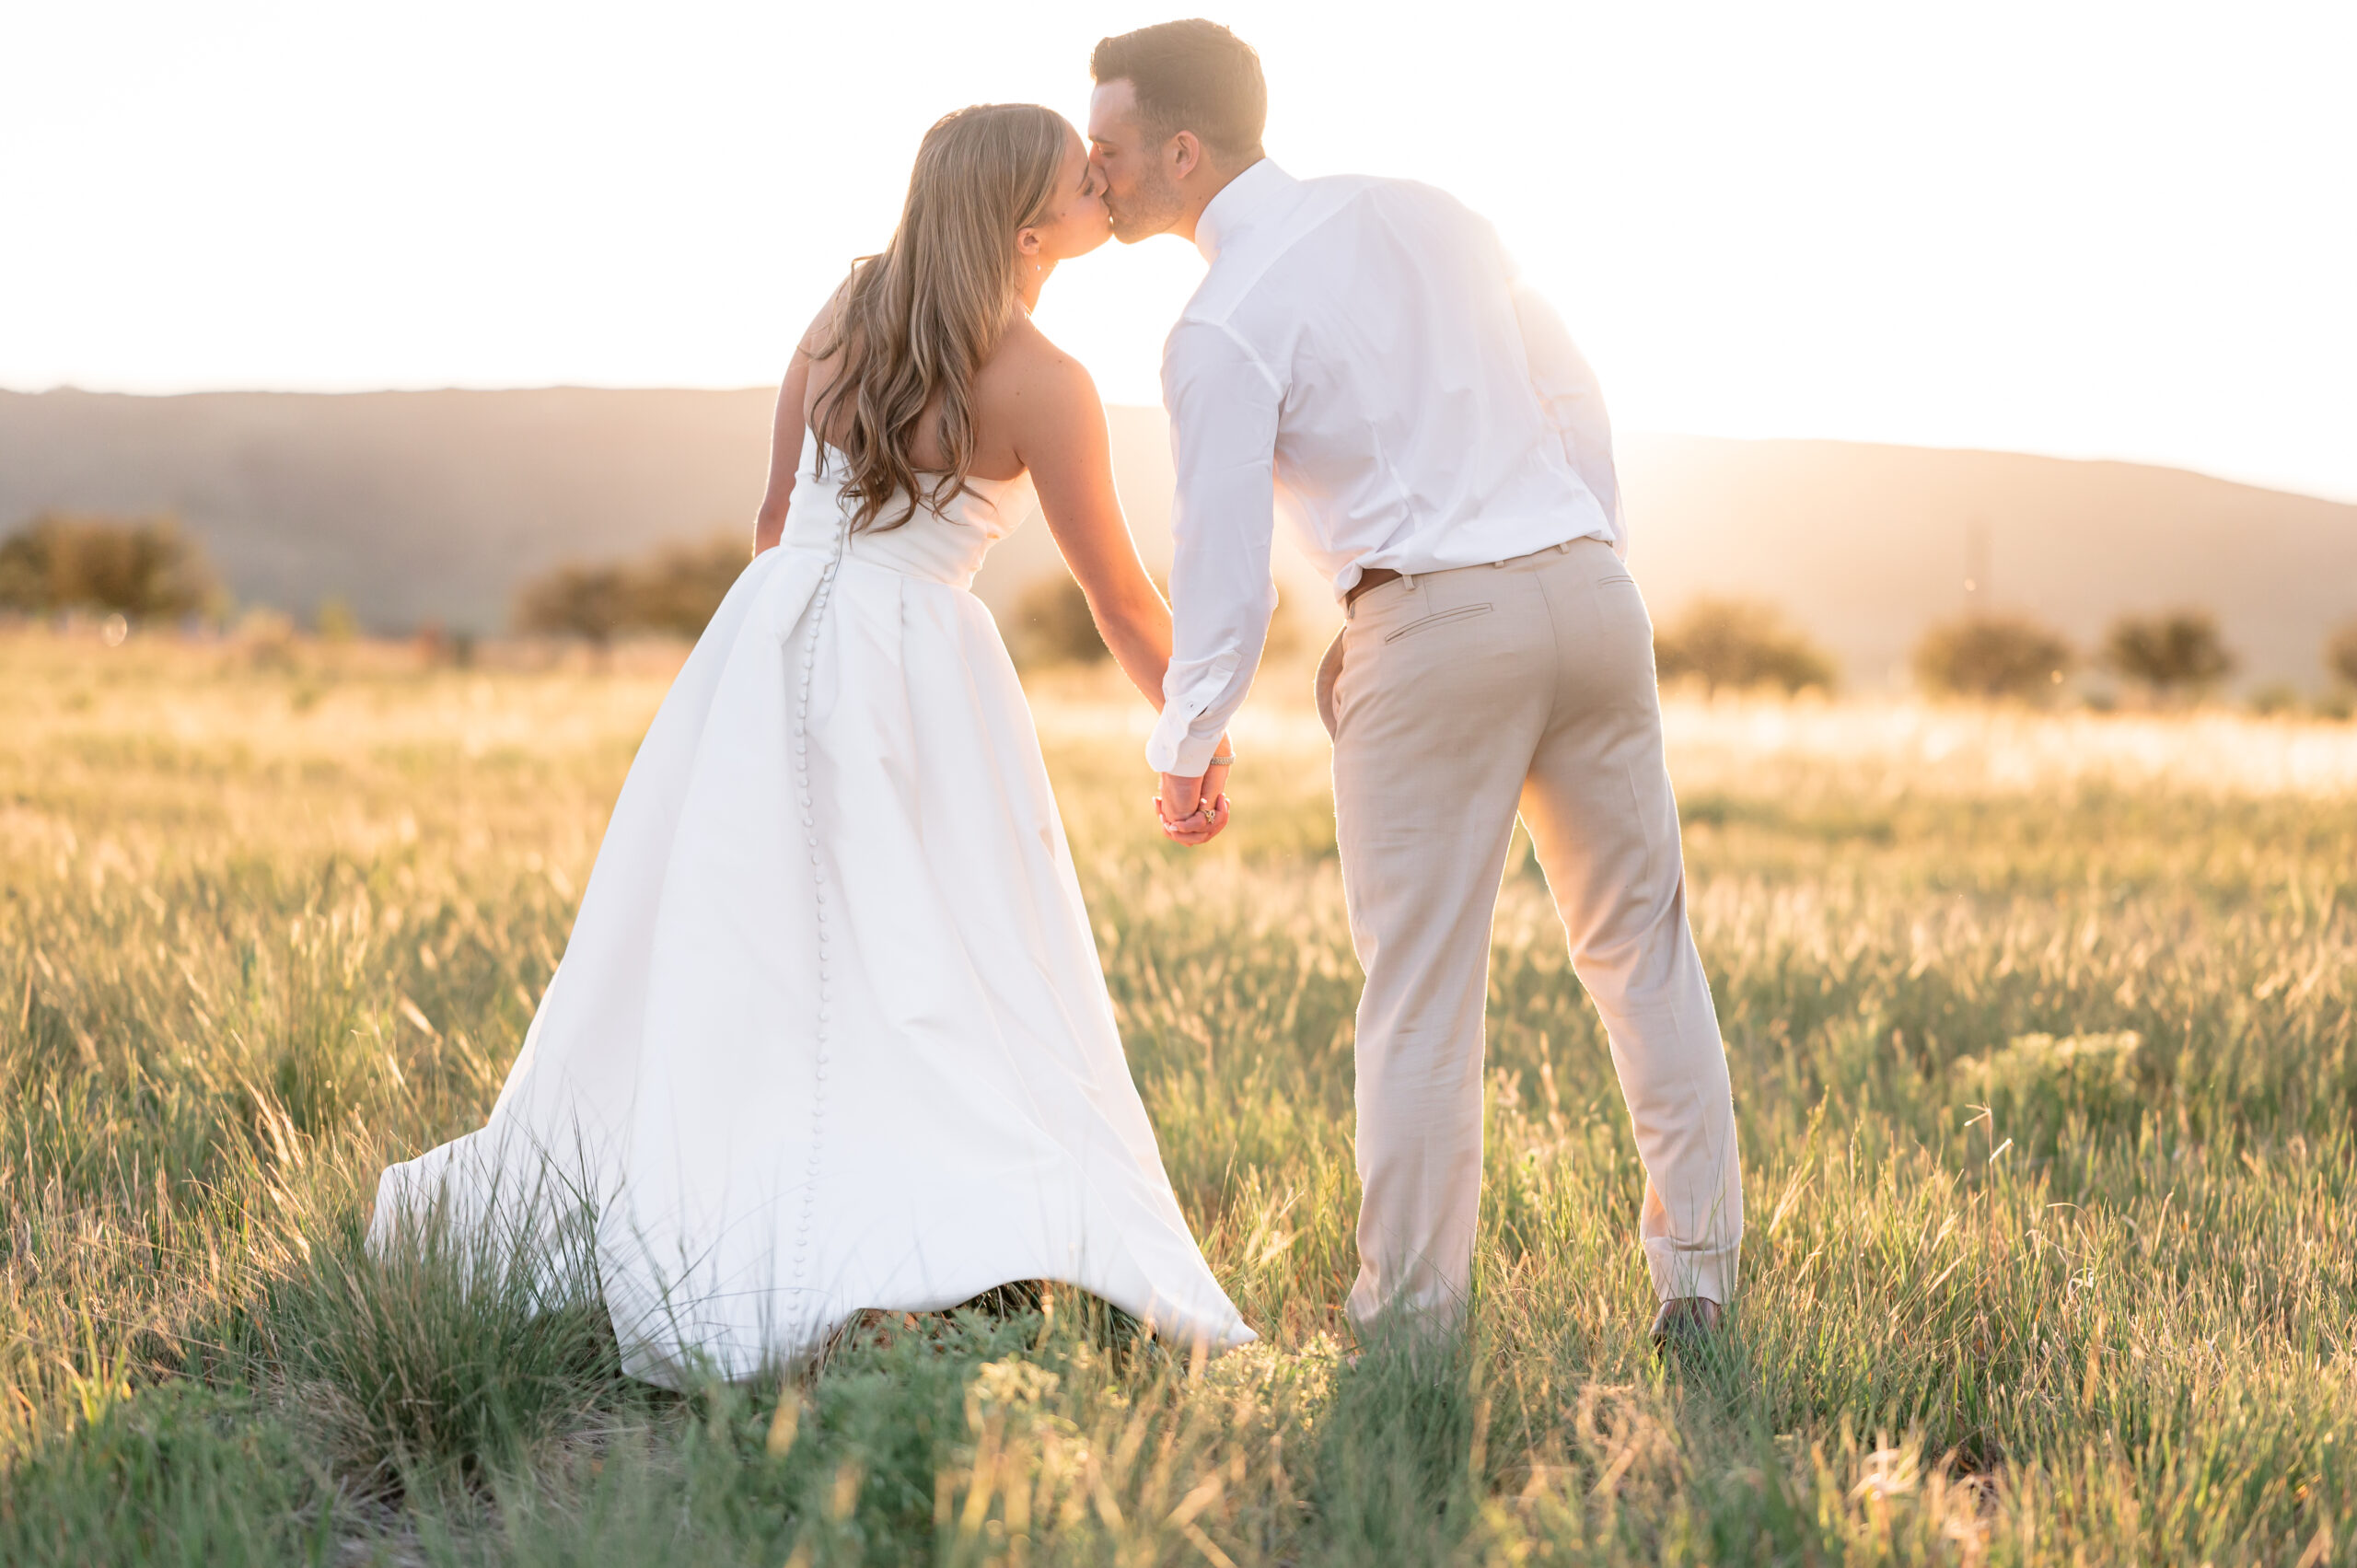 Fort Collins Colorado Wedding at The Covey | Britni Girard Photography - Colorado wedding photography and videography team in Northern Colorado